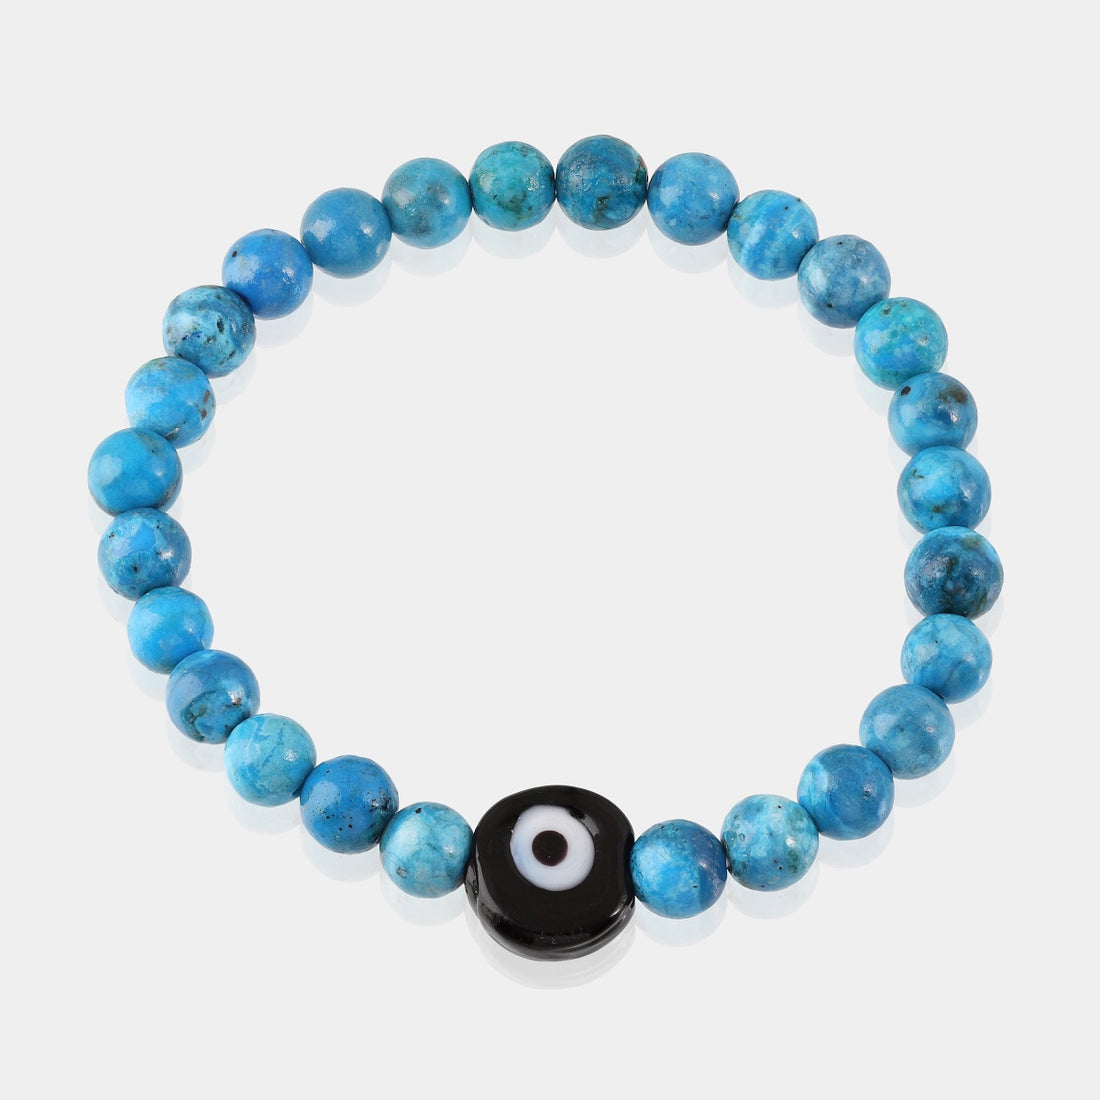 A bracelet adorned with smooth round Turquoise gemstone beads, showcasing a calming blue hue reminiscent of the sky and sea.